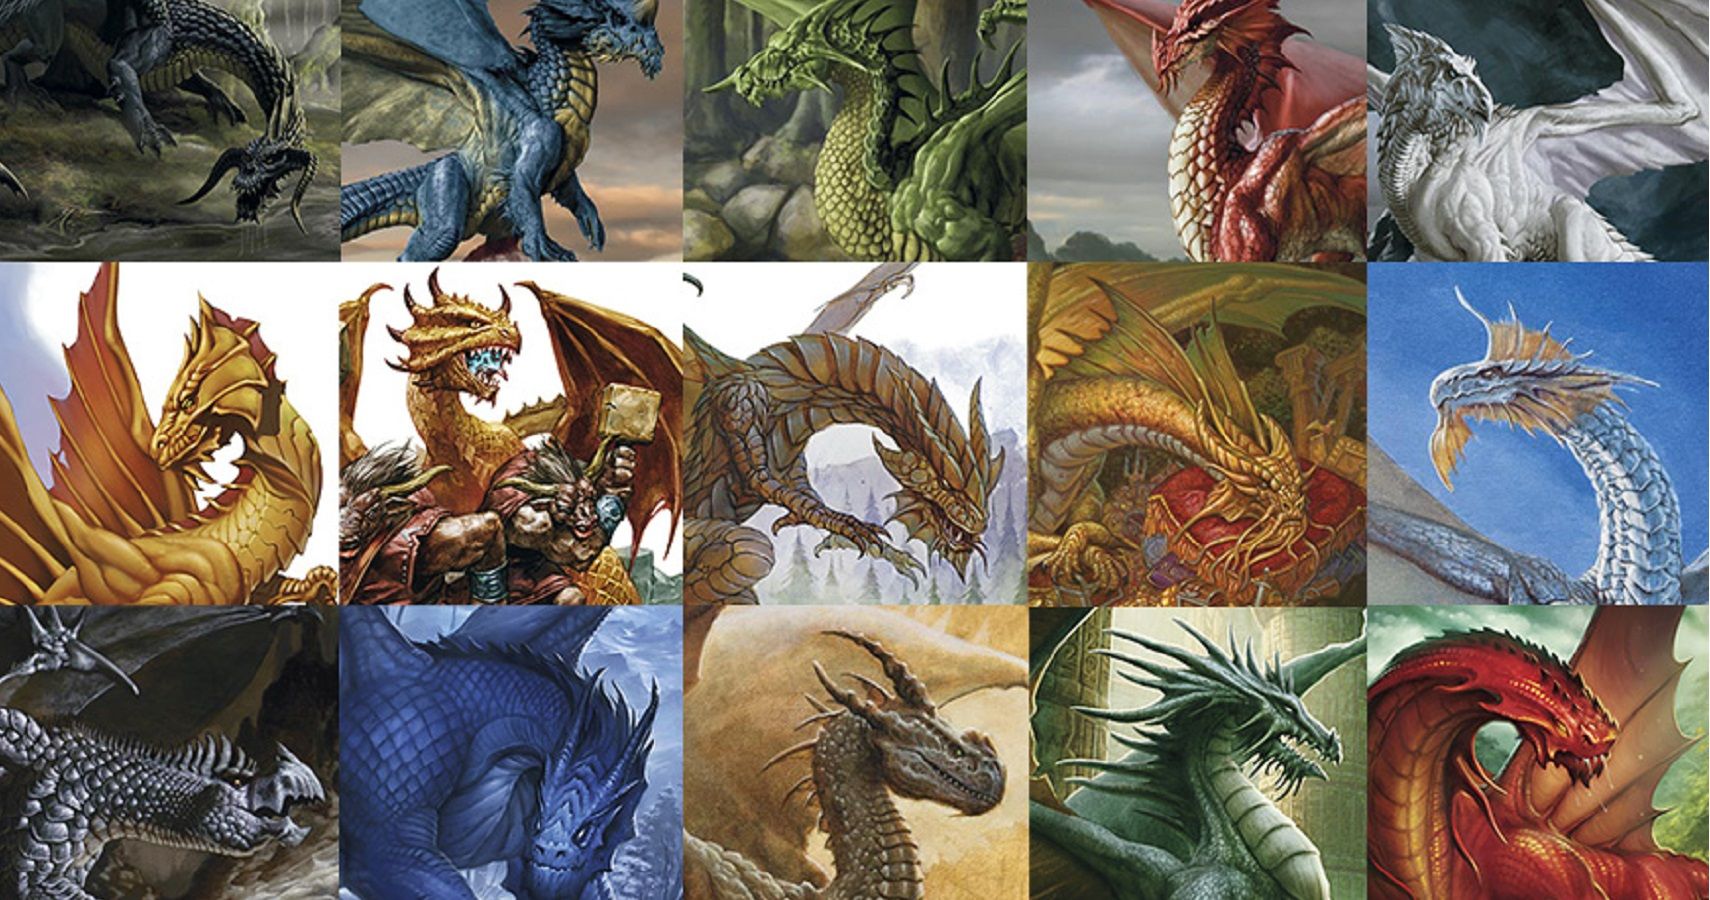 10 Awesome Dragons And How To Use Them Properly in D&D | CBR